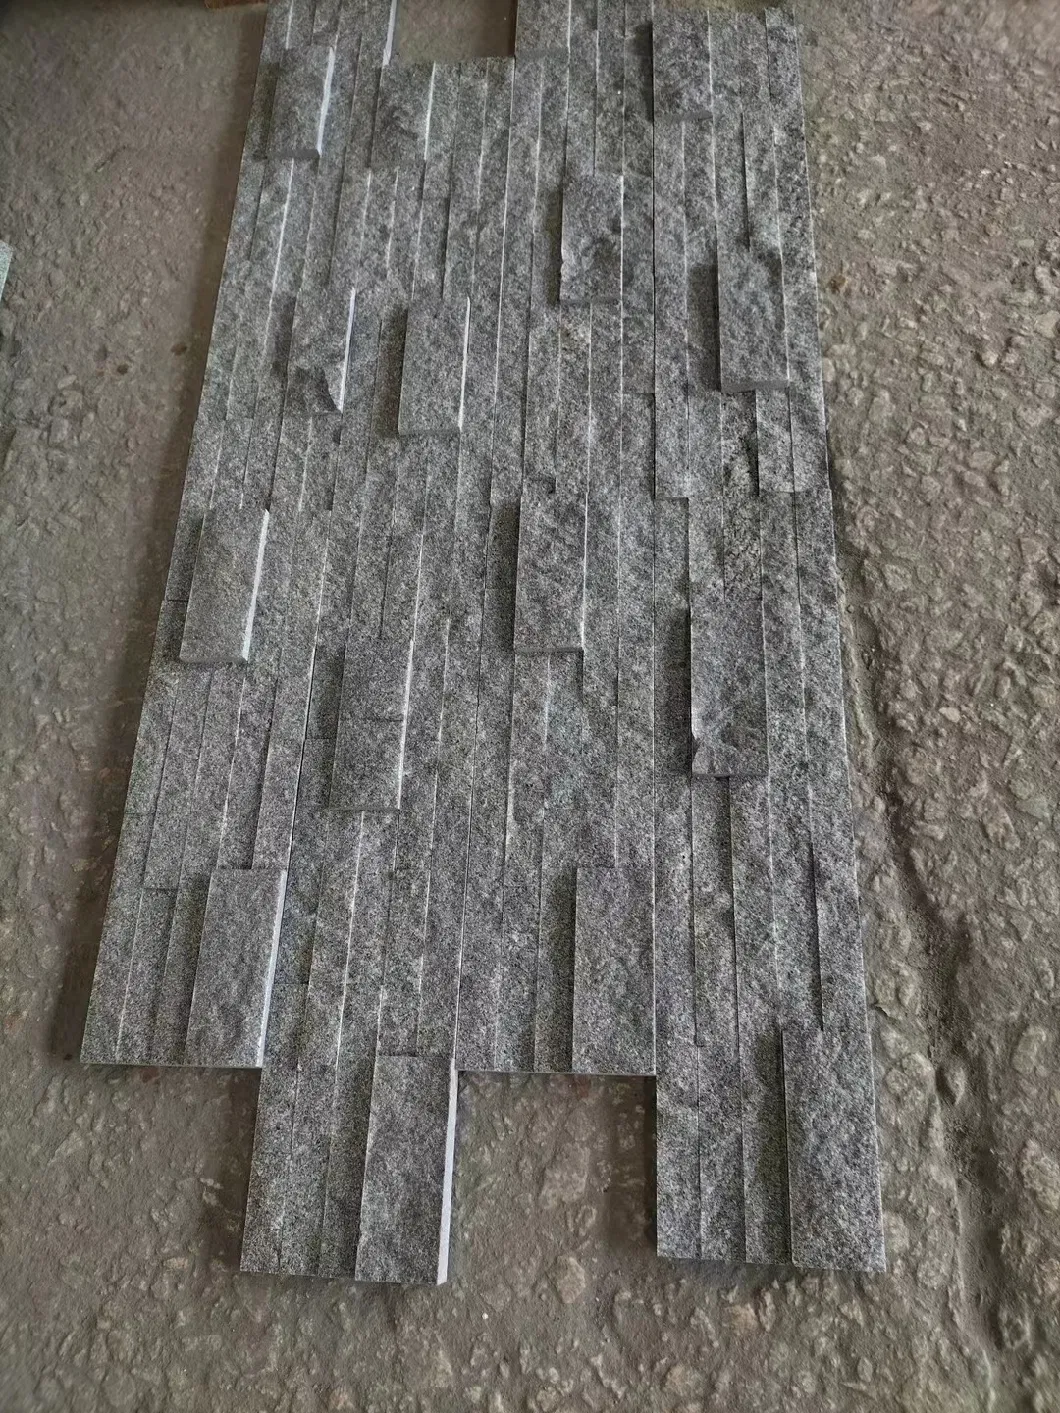 Natural Old G654 Cultured Stone/Slate for Building Decor Feature Wall Tiles